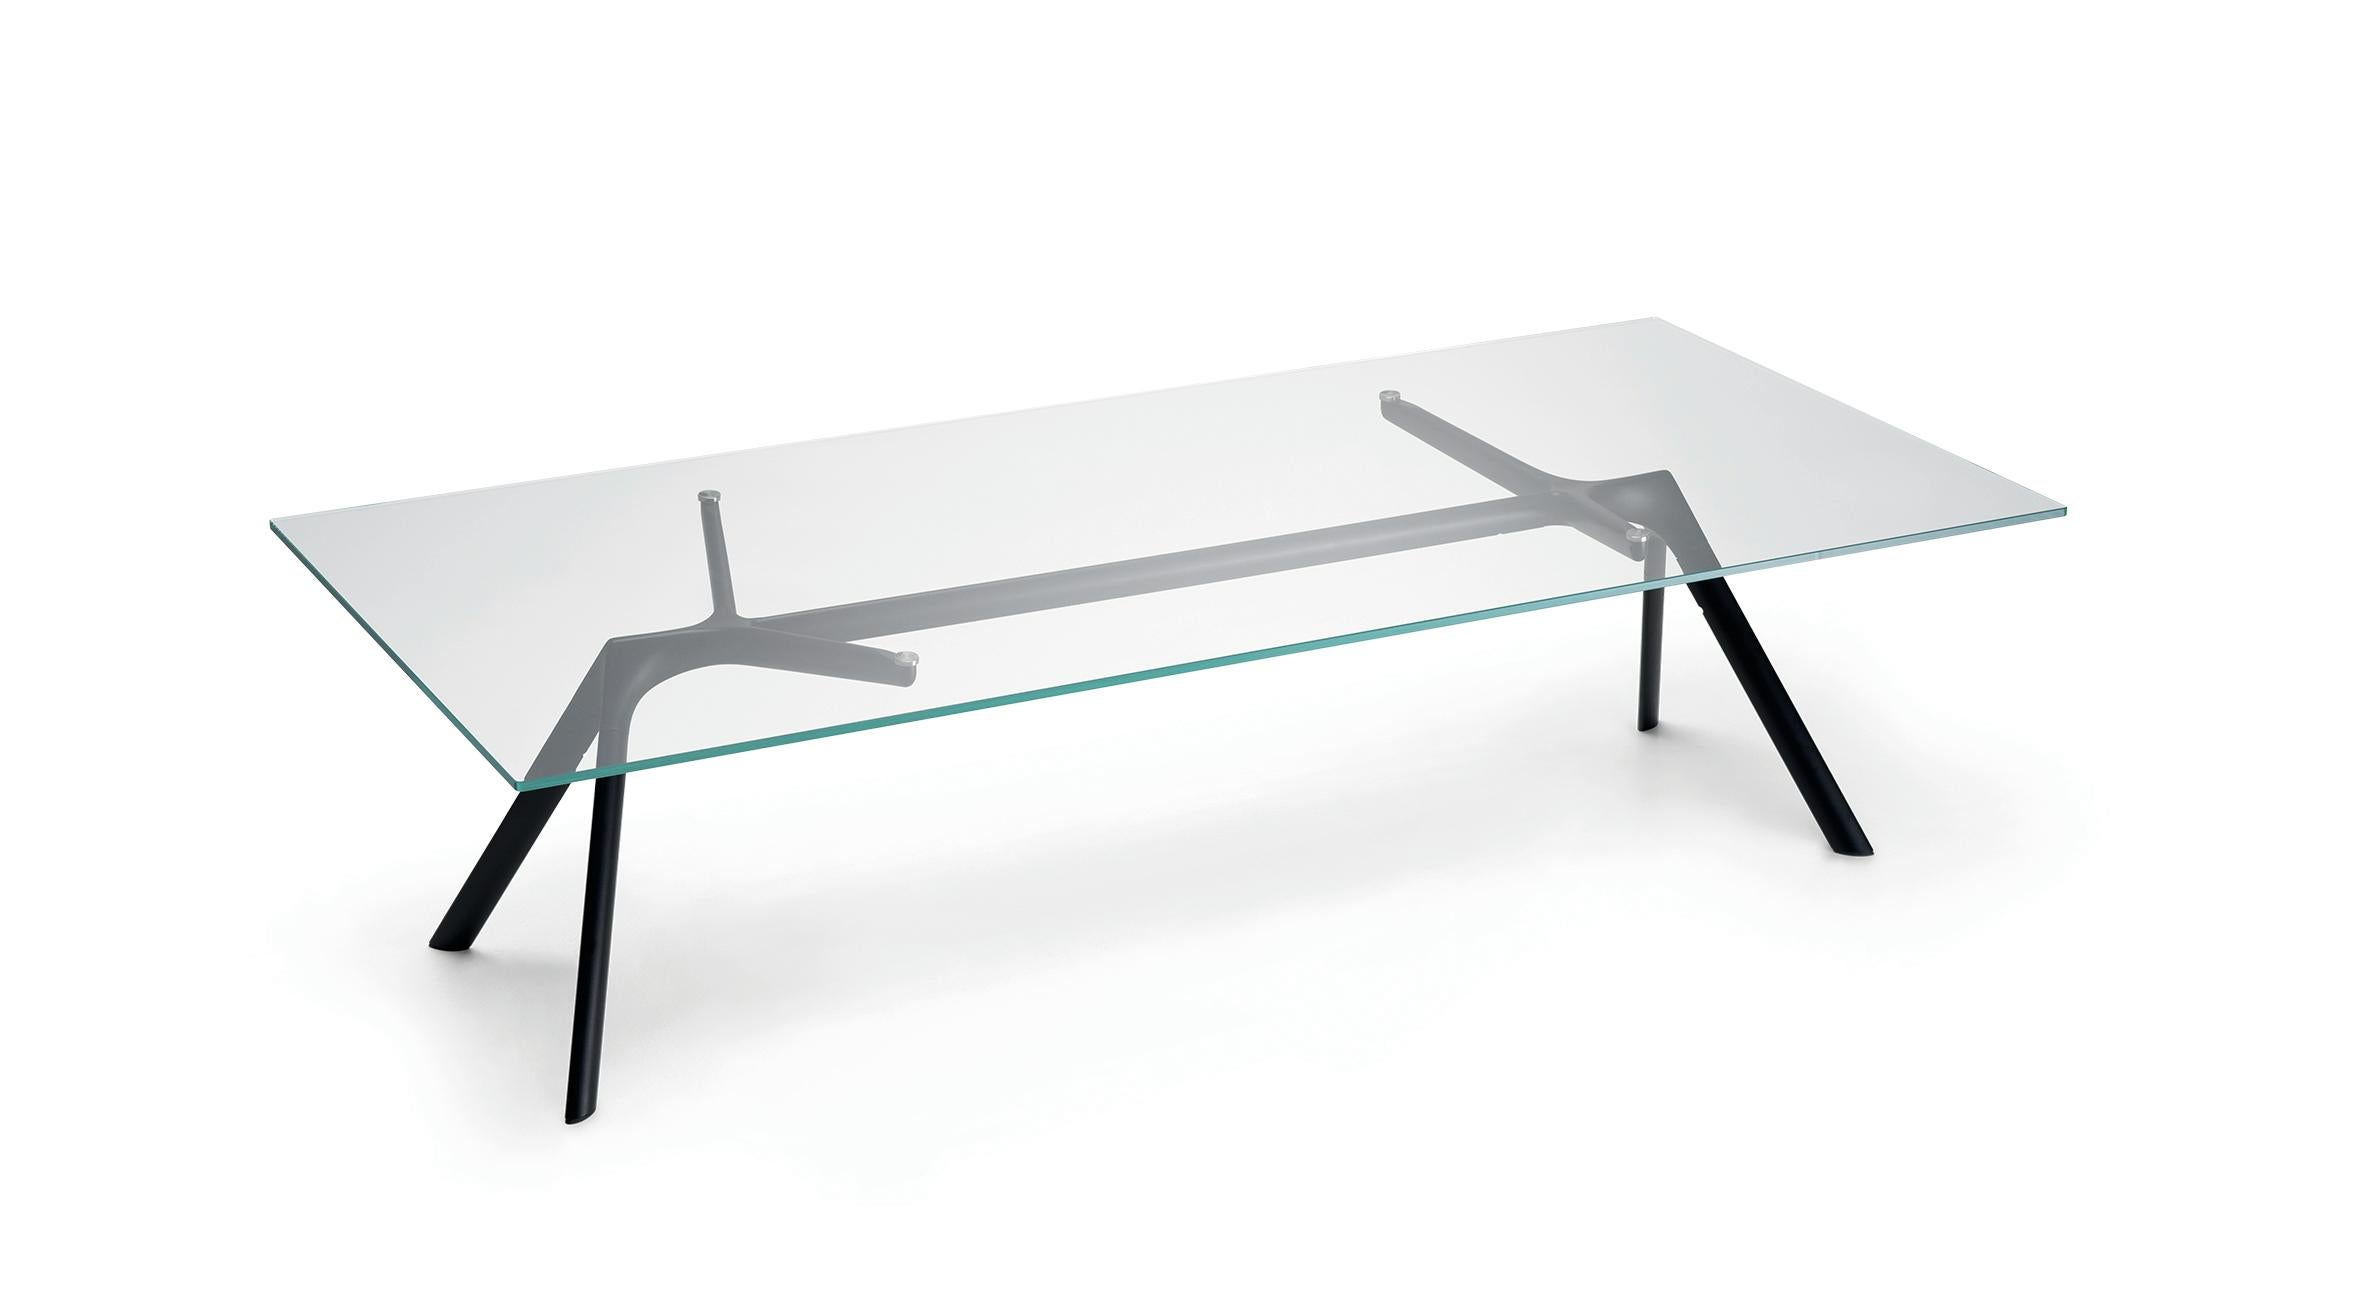 Alias Small Dry XS 45B Table in Glass Top with Black Lacquered Aluminium Frame by Alberto Meda

Low table with structure made of lacquered aluminium elements. Top in extra light tempered glass, thickness 10 mm.

Born in Lenno Tremezzina (Como),